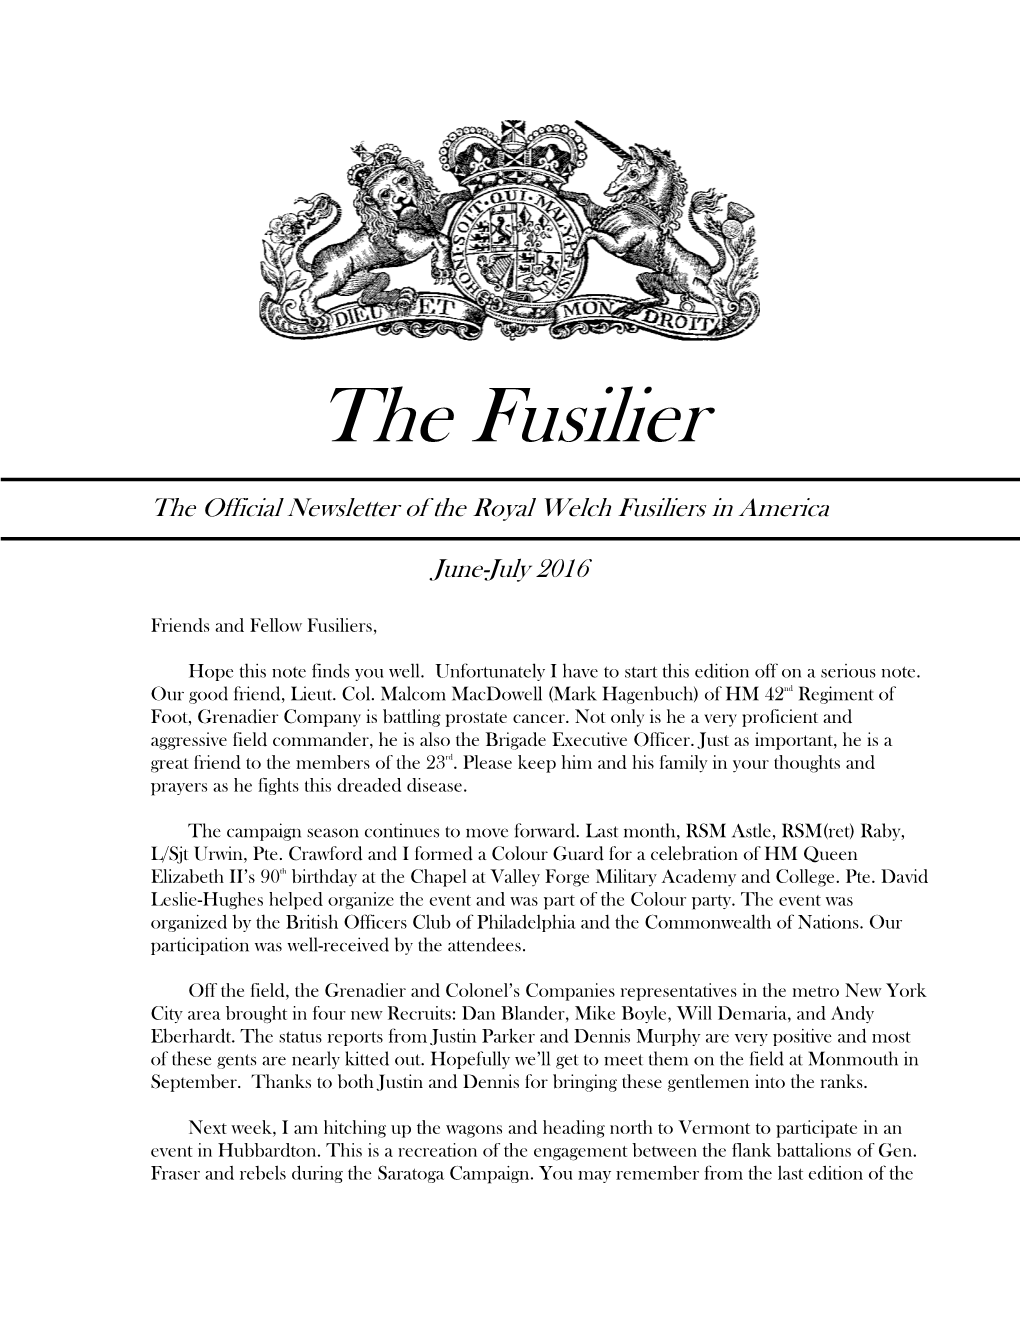 The Fusilier